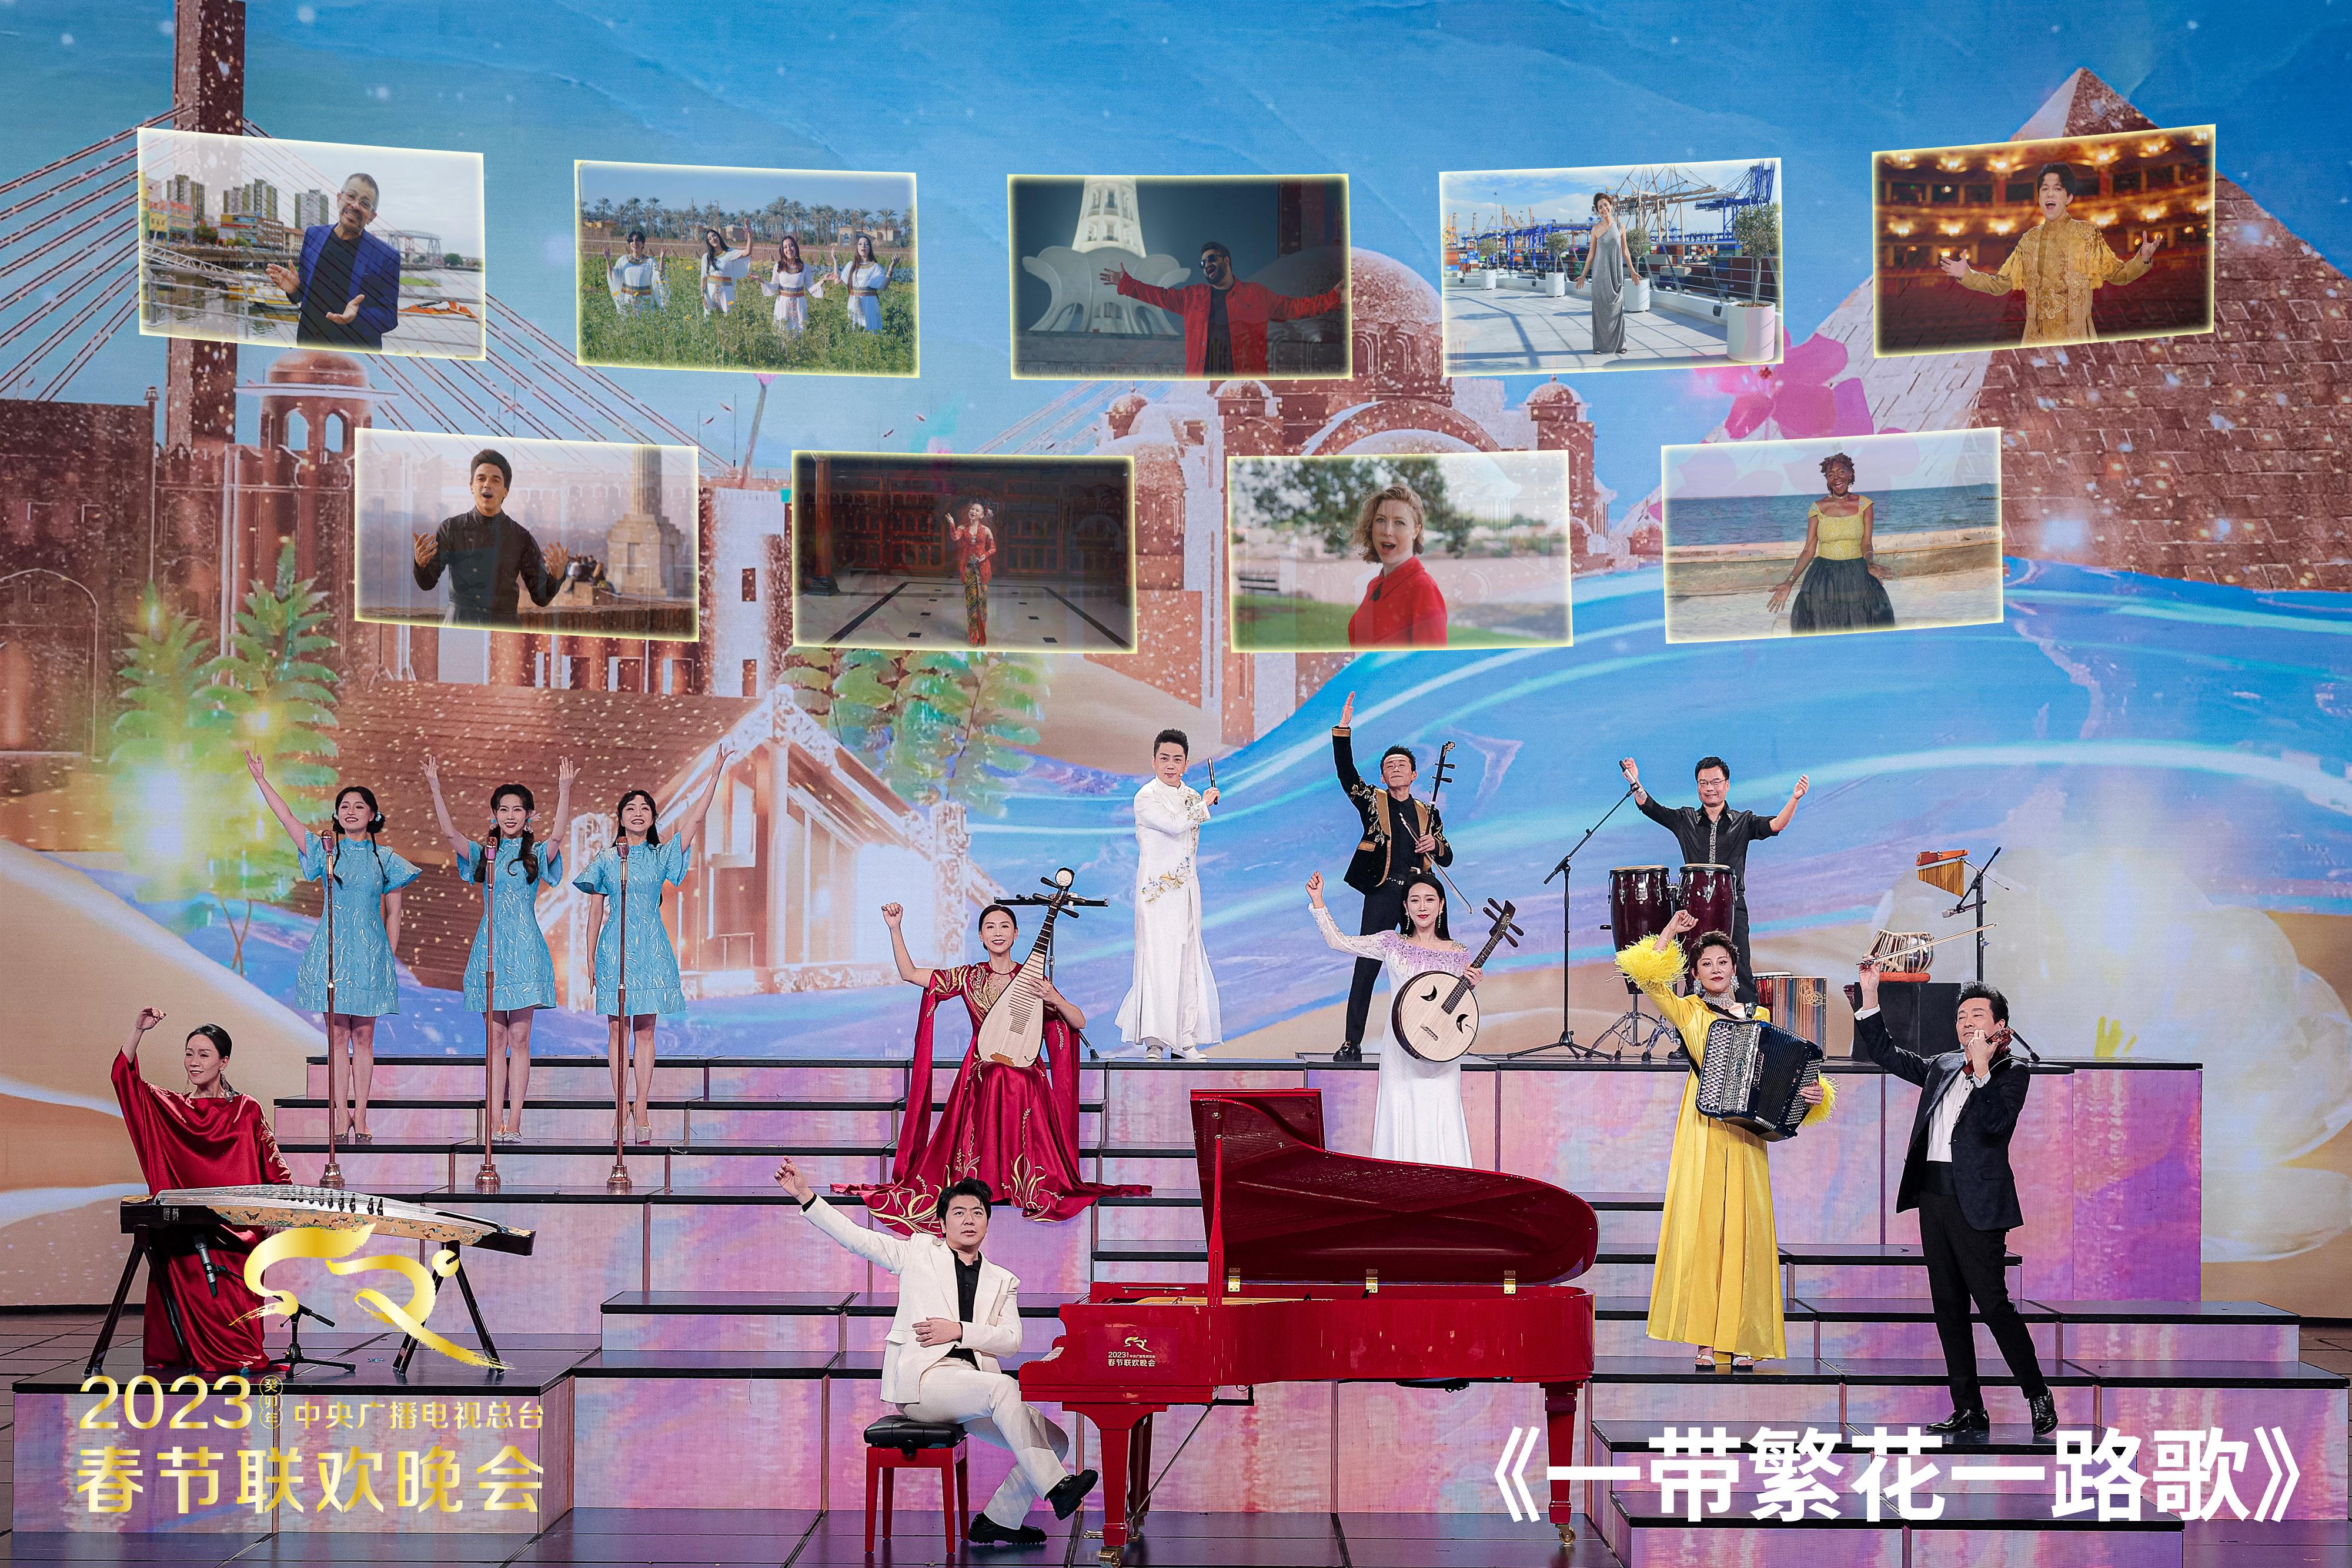 Artists from countries along the Belt and Road and Chinese musicians gathered online and jointly presented a song. /CMG